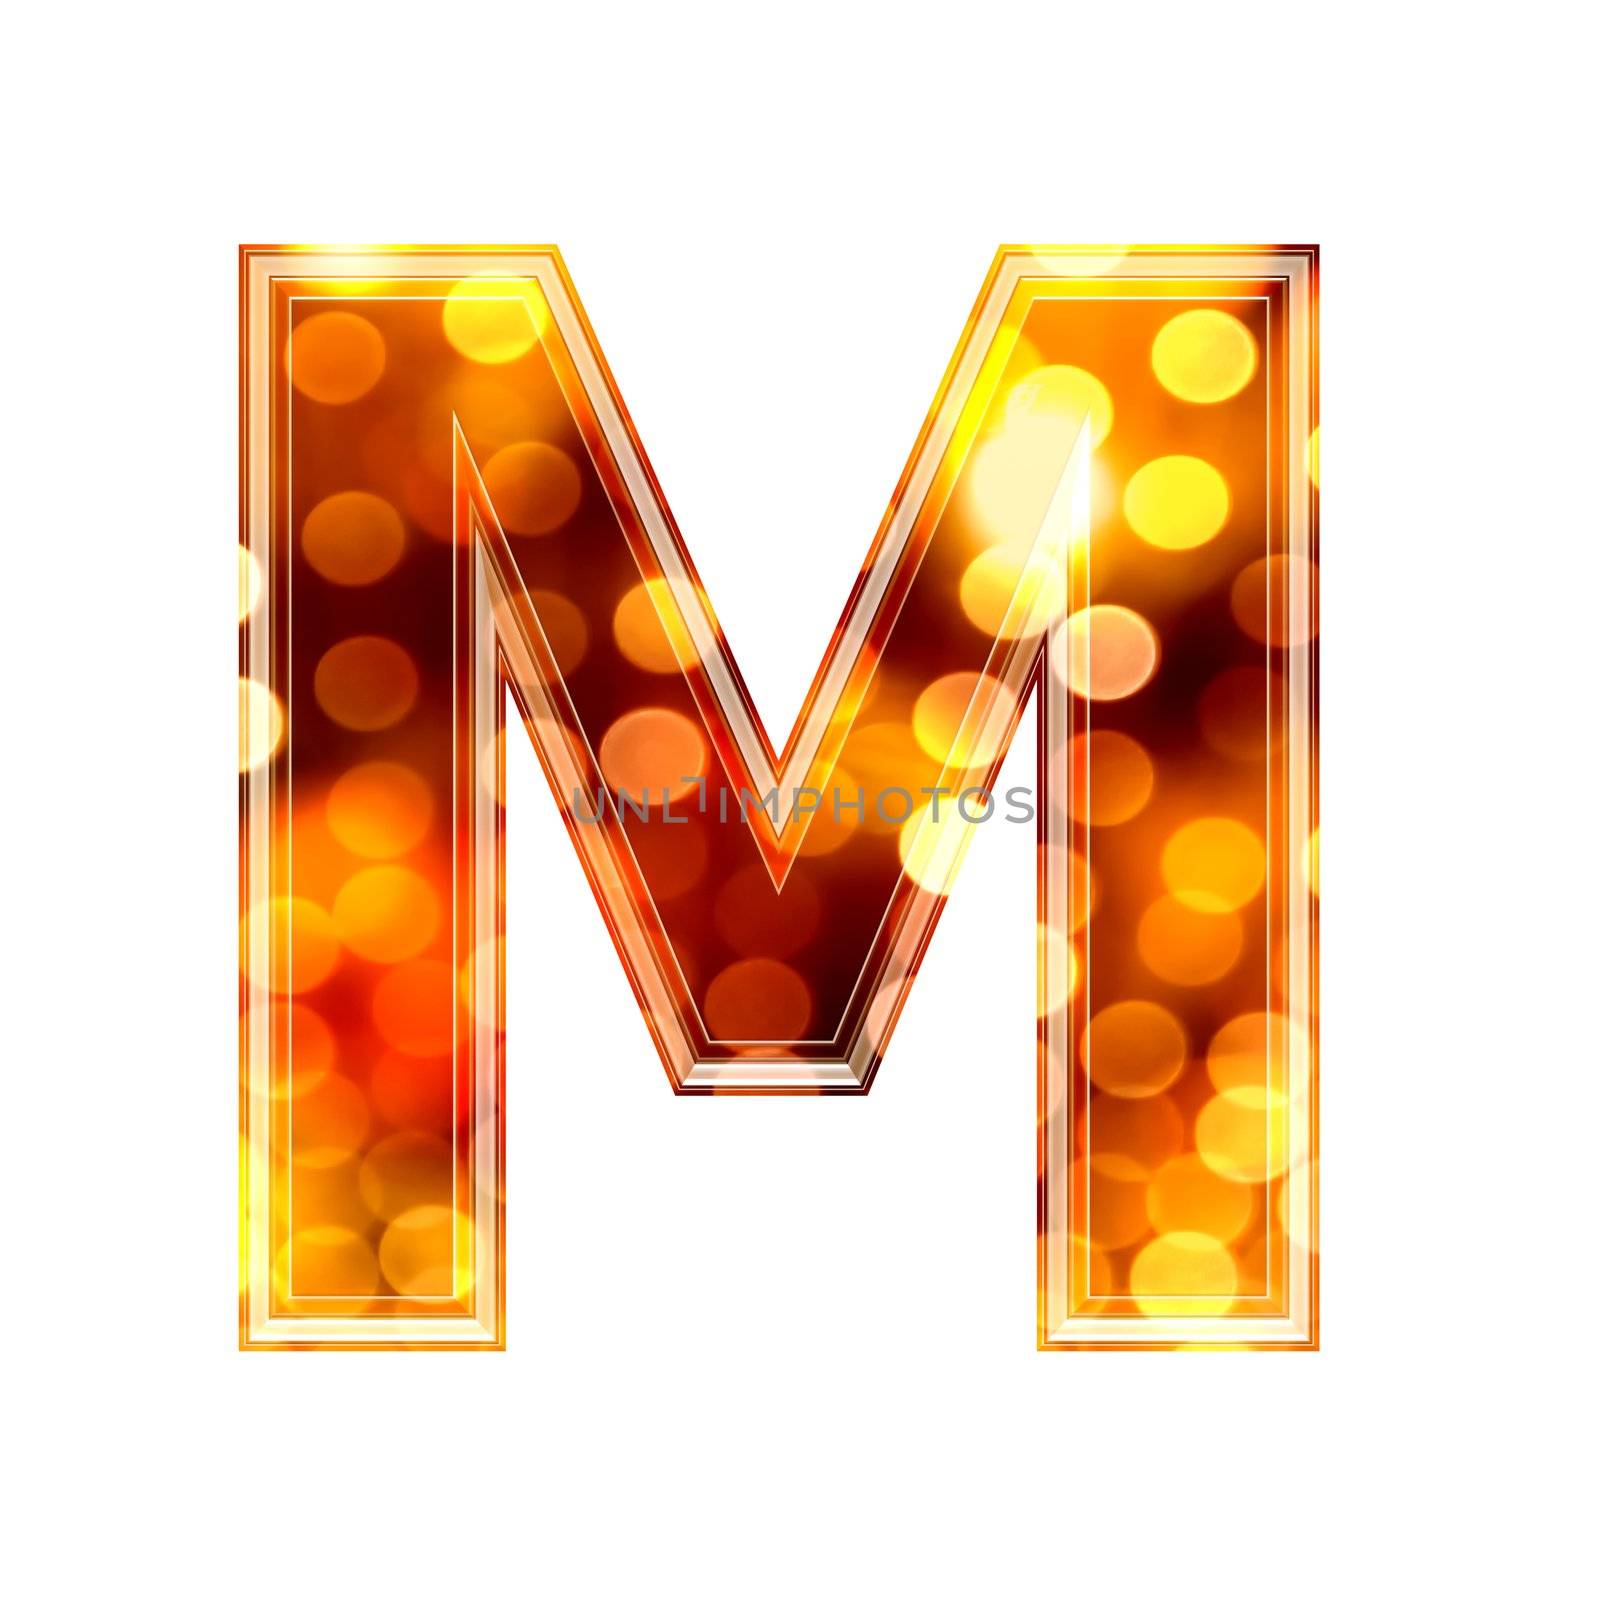 3d letter with glowing lights texture - M by chrisroll